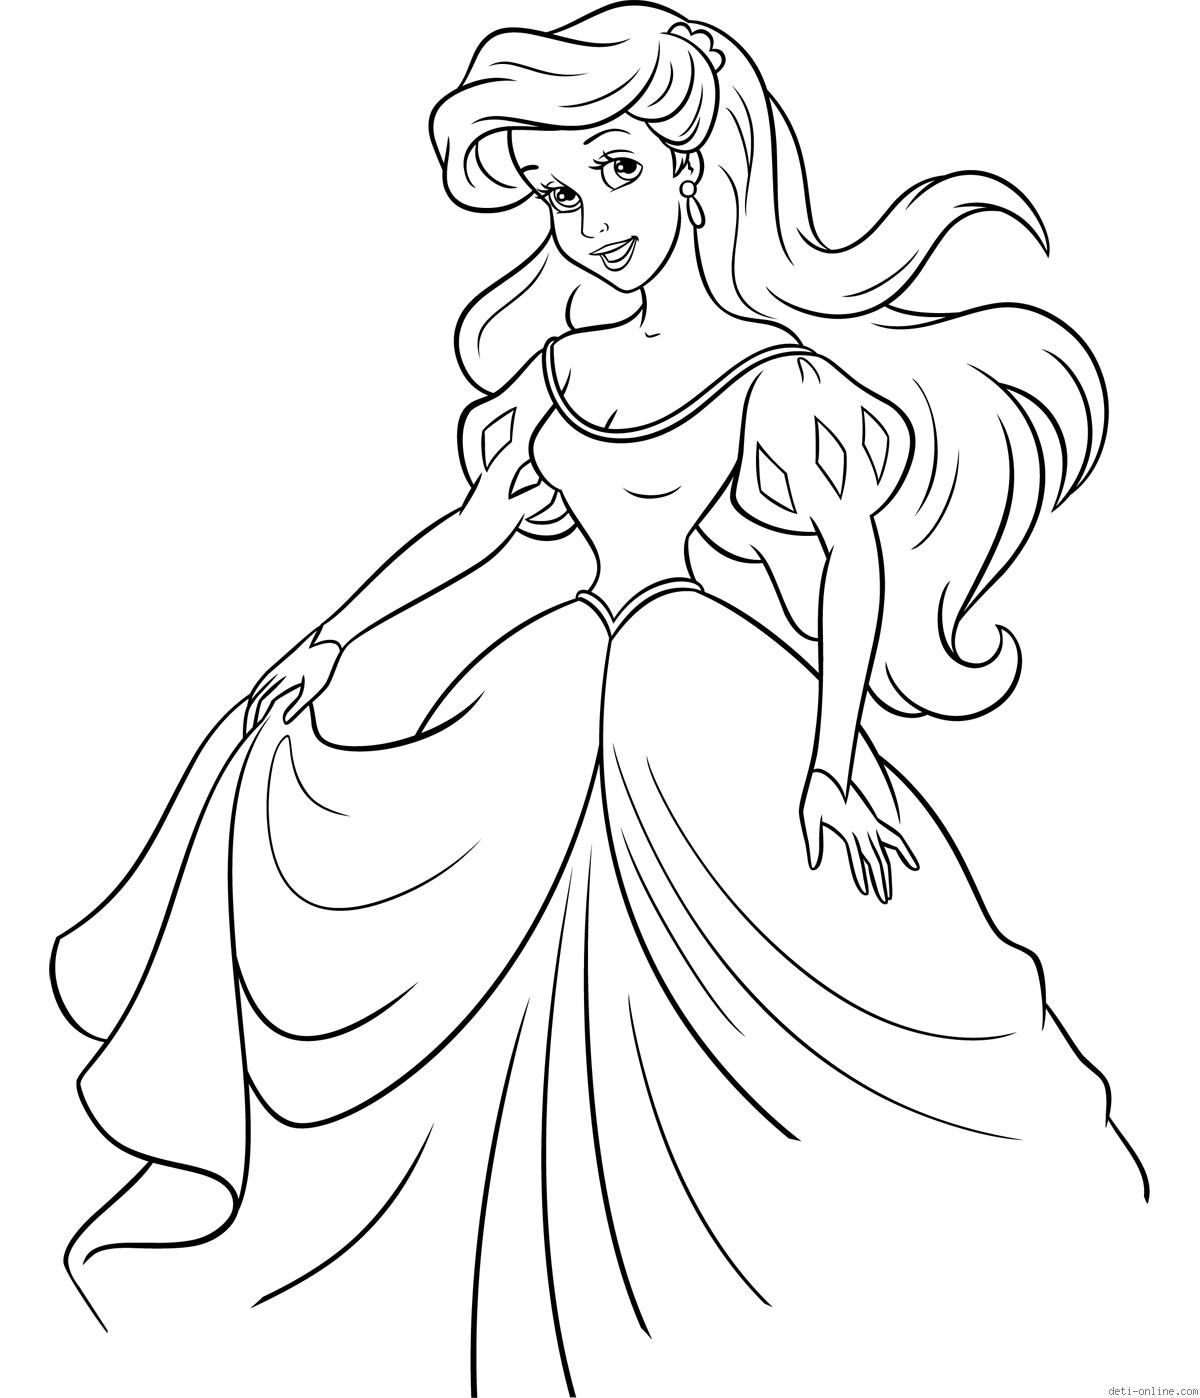 Ariel the Little Mermaid coloring pages for girls to print ...